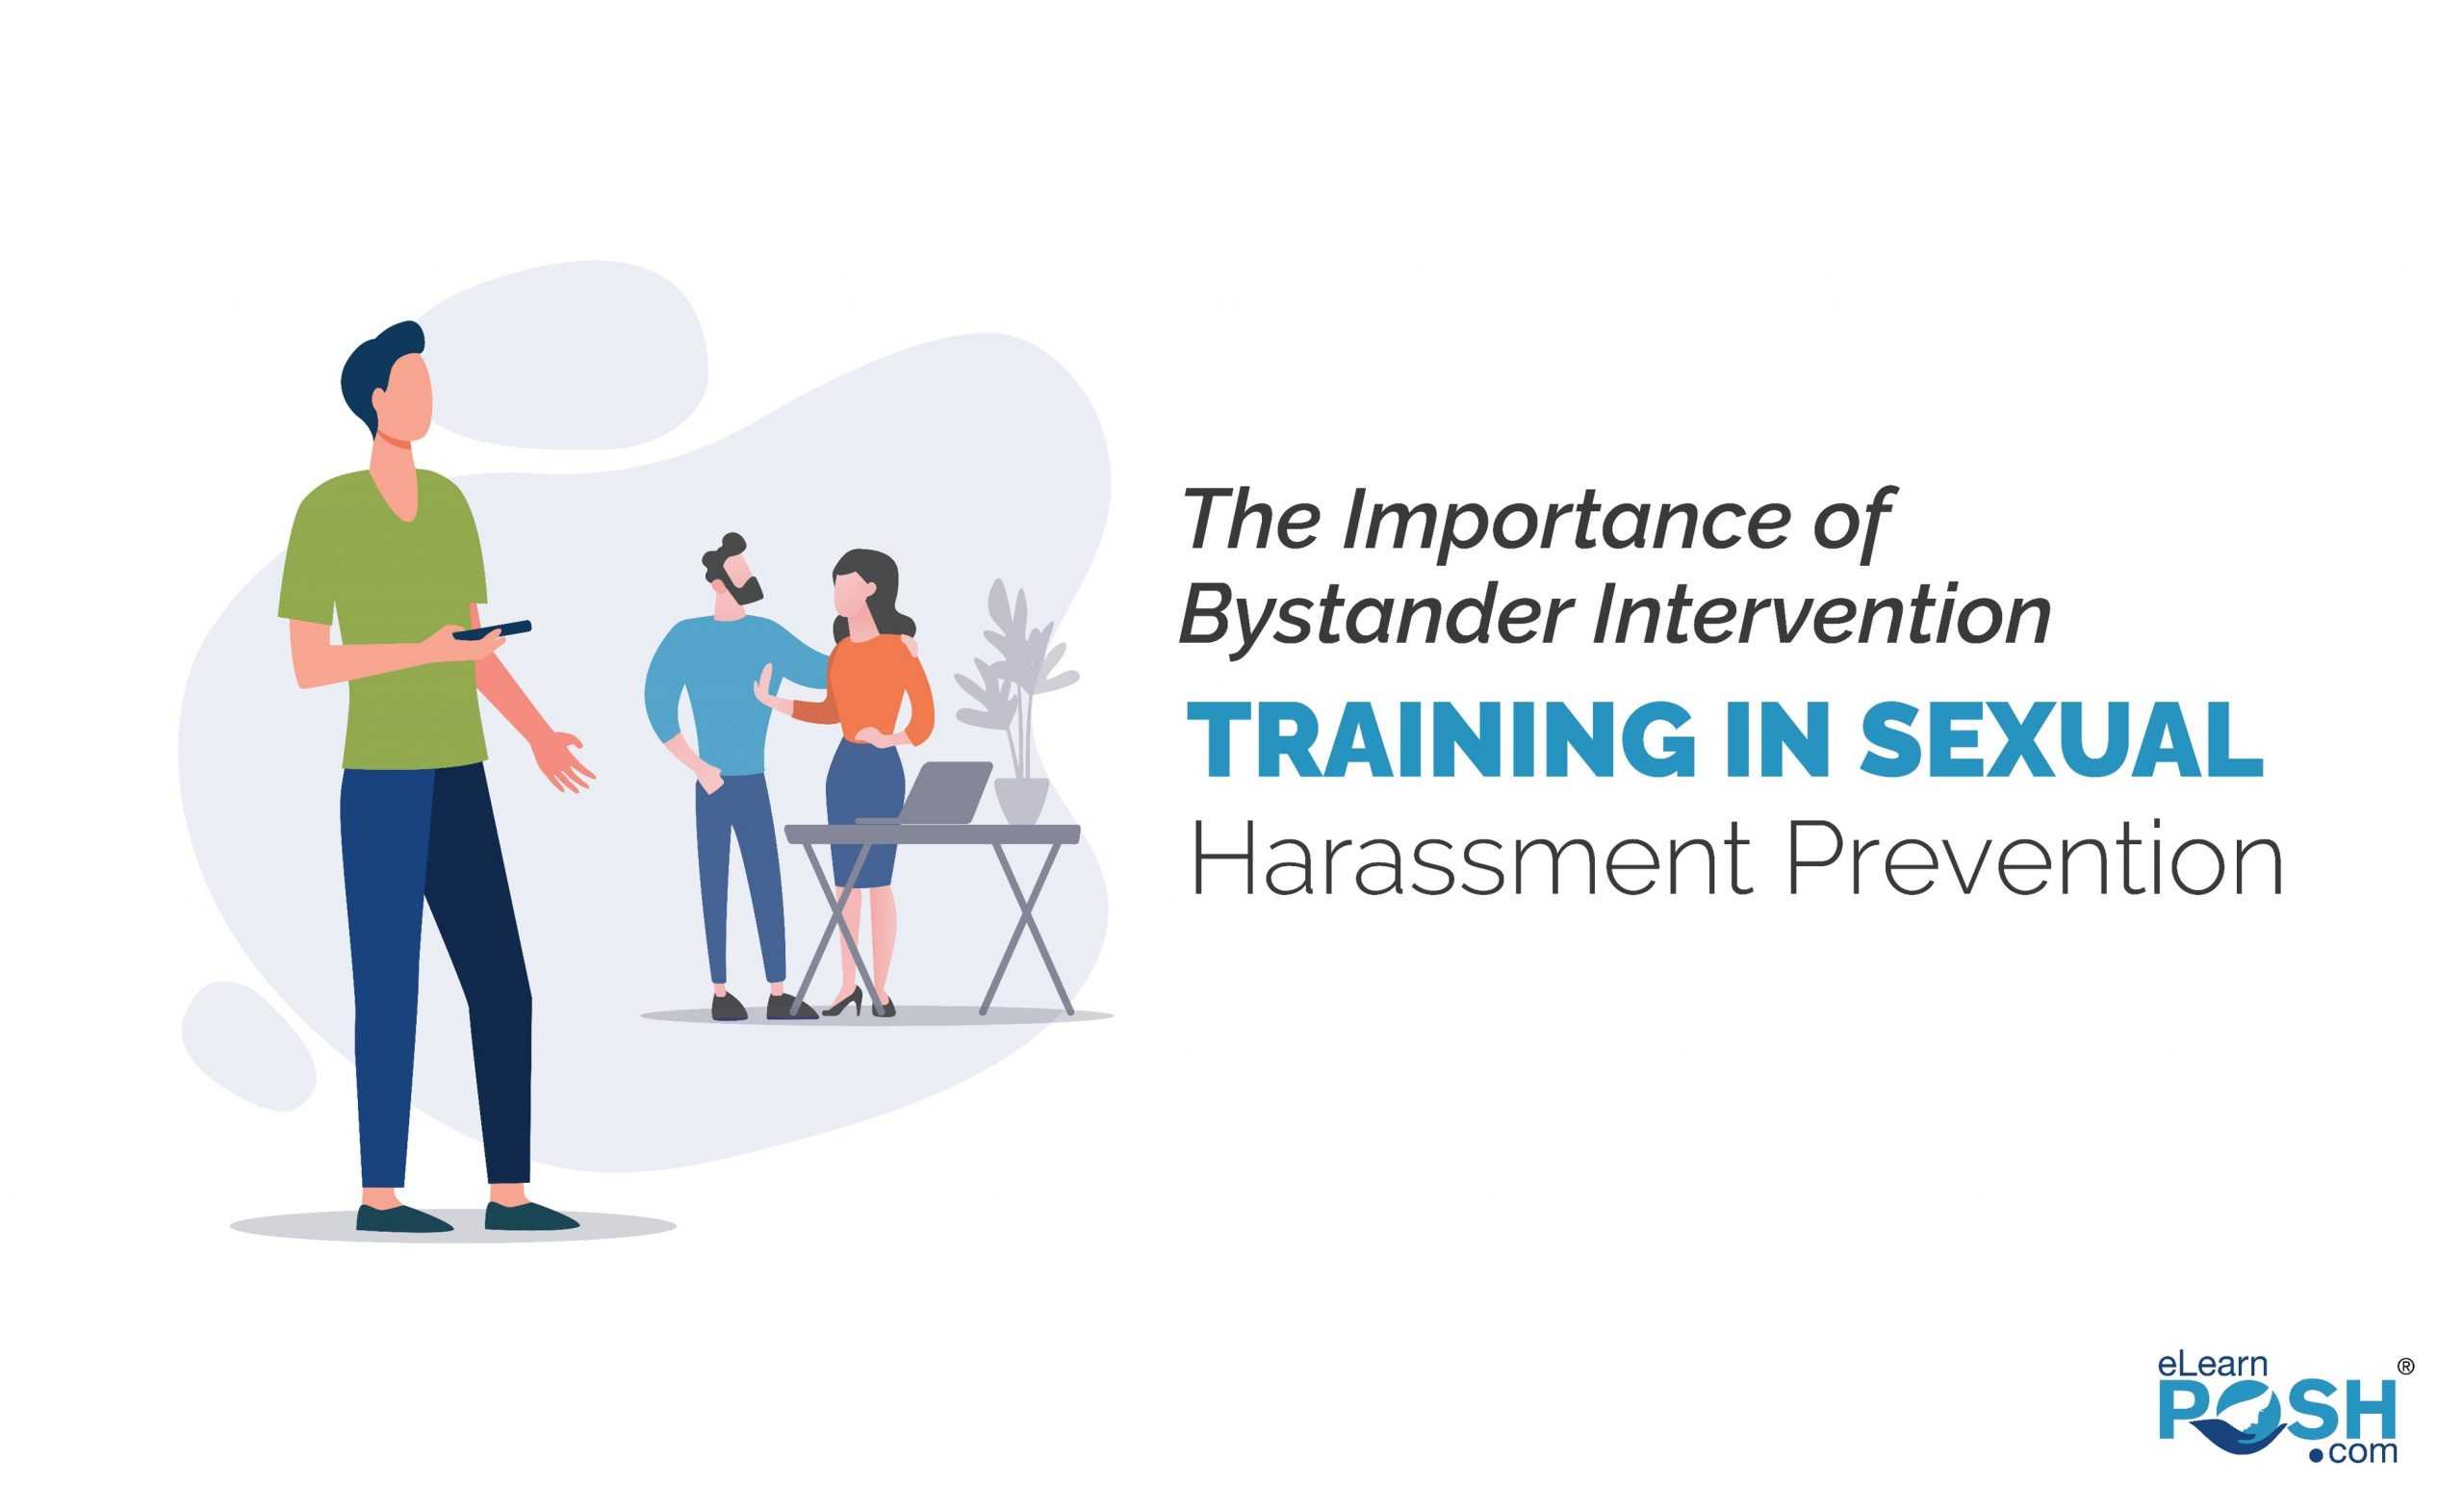 Bystander Intervention Training in Sexual Harassment Prevention